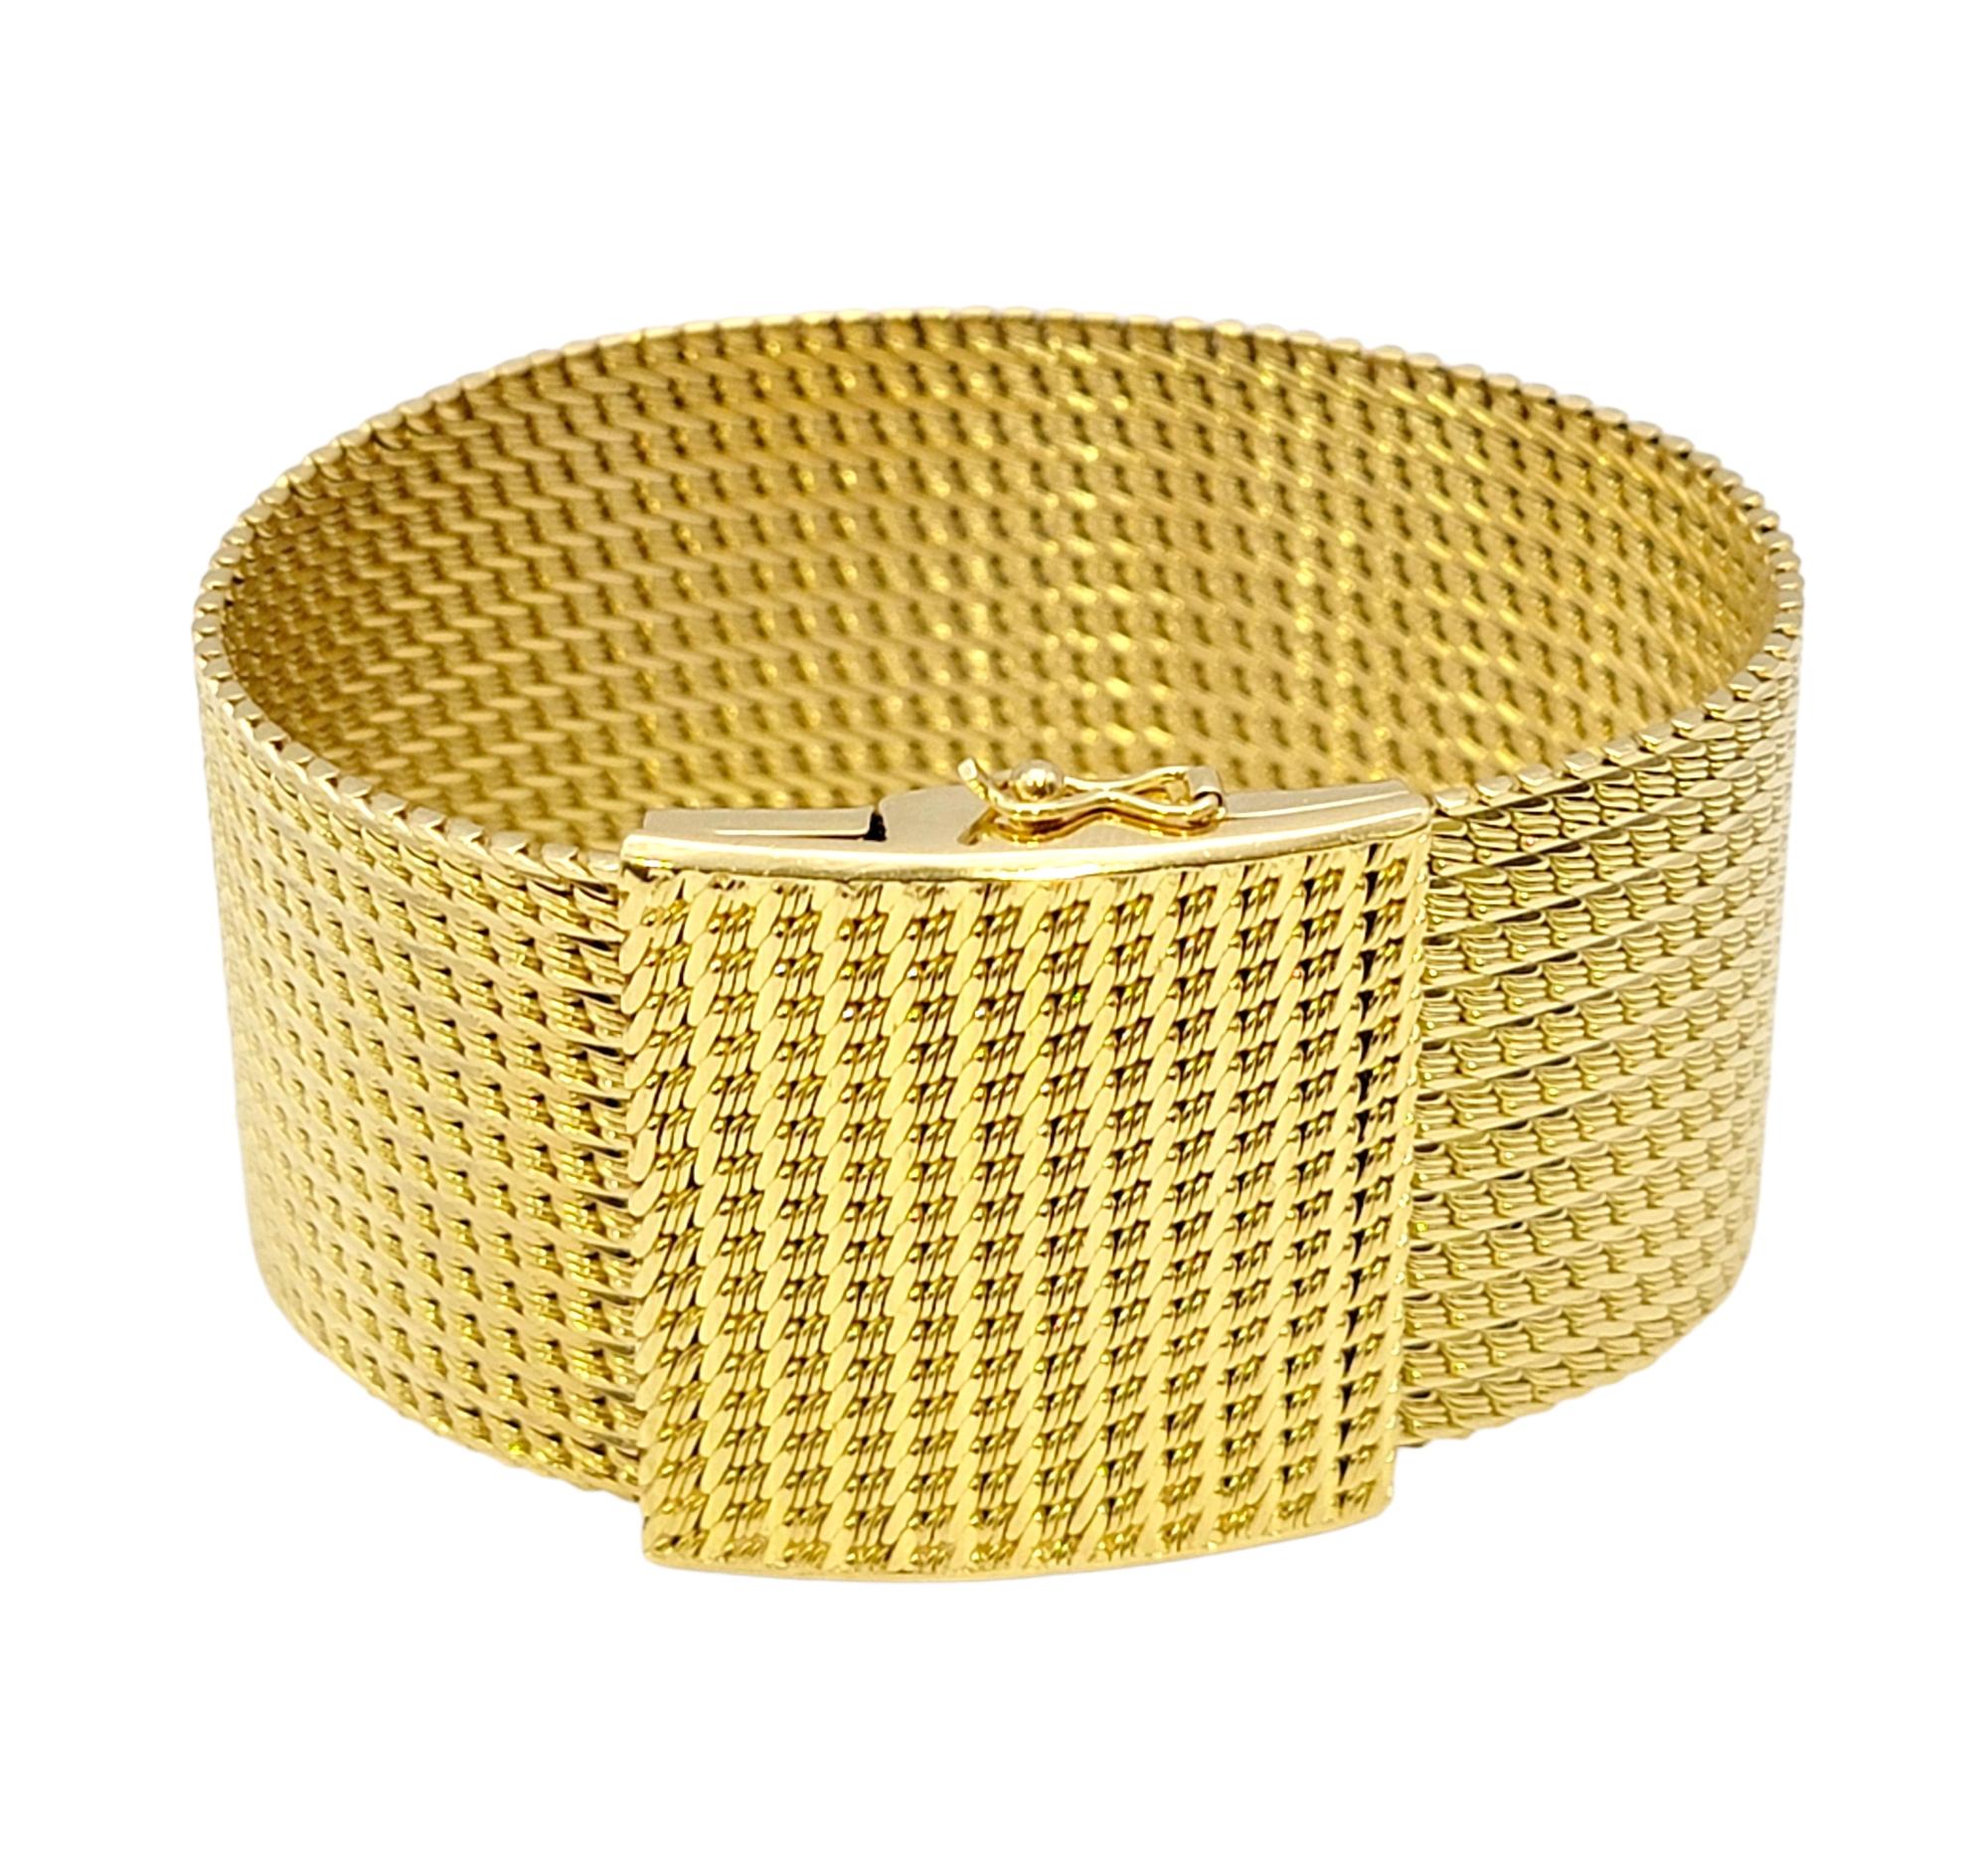 Striking wide mesh bracelet. The flexible style hugs the wrist for a comfortable and secure fit, while the simple yet luxurious design goes with just about everything. 

This striking piece features a wide polished 18 karat yellow gold flexible